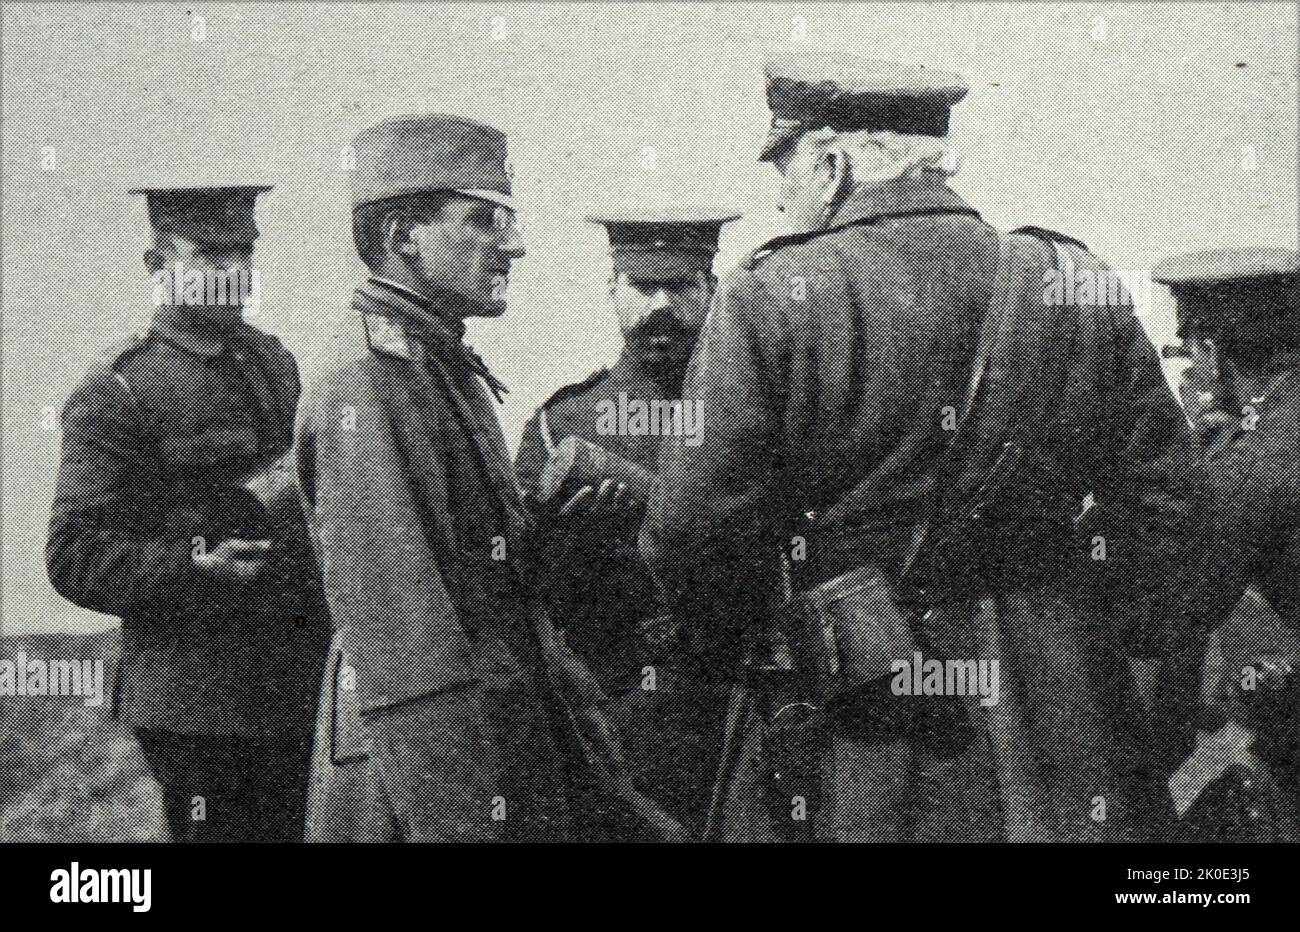 Prince Alexander of Serbia at the war front with British officers, World War I, 1915. Alexander I, was prince regent of the Kingdom of Serbia from 1914 and later a king of Yugoslavia from 1921 to 1934. He was assassinated by the Bulgarian Vlado Chernozemski, during a 1934 state visit to France. Stock Photo